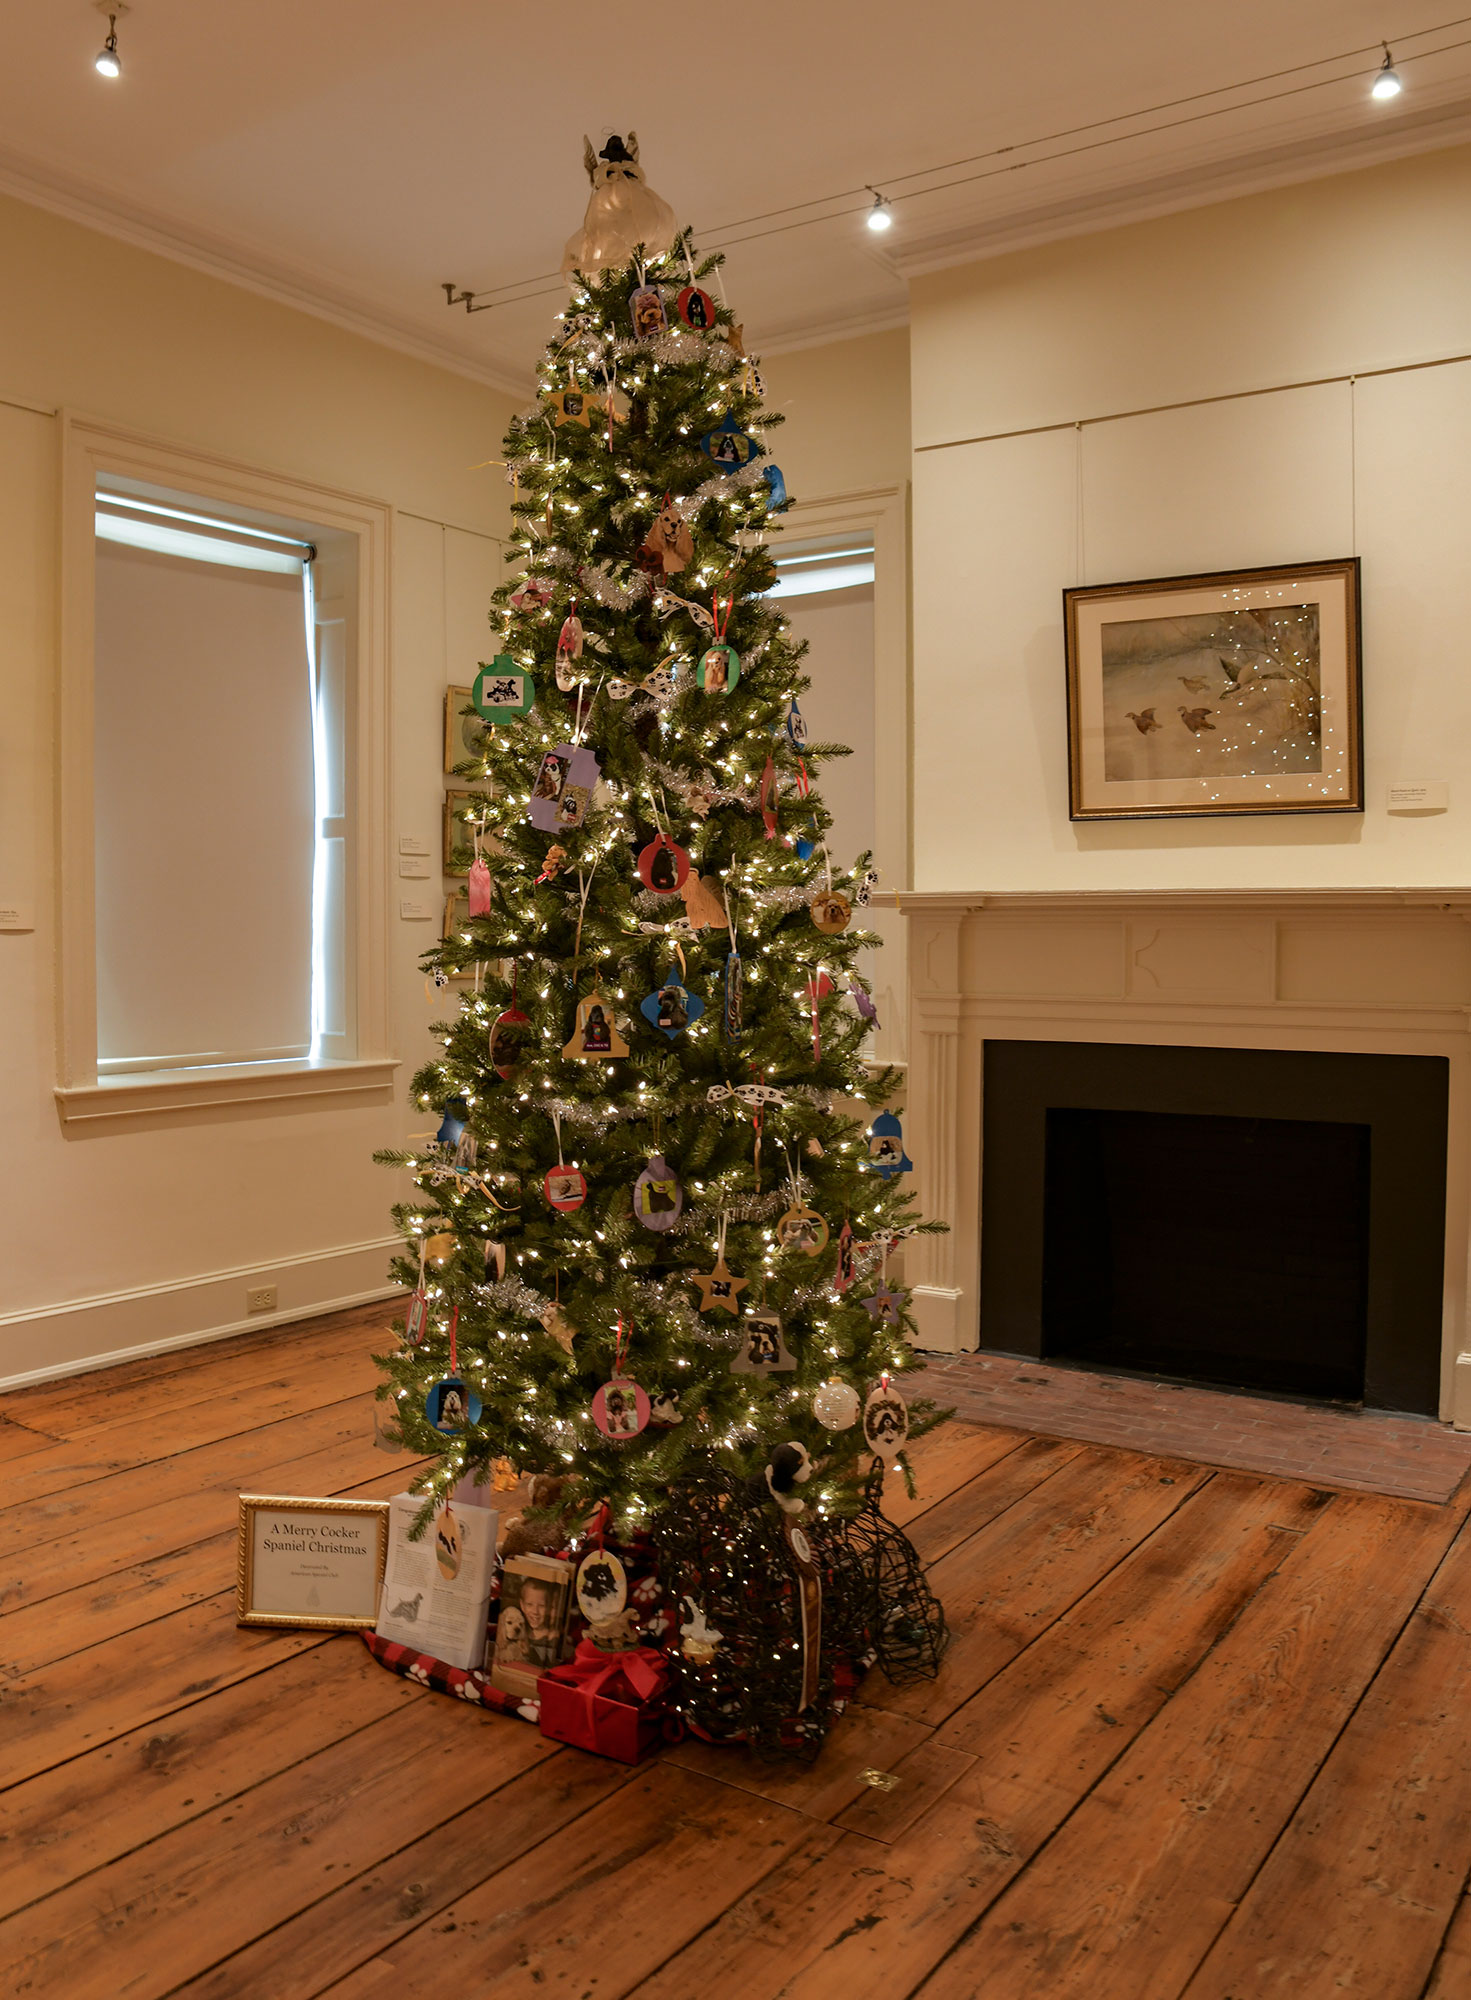 “A Merry Cocker Spaniel Christmas” tree by the American Spaniel Club/Southern NJ features hand made ornaments of Cocker Spaniels among bright lights. The room is beige with a wildlife painting above a fireplace.